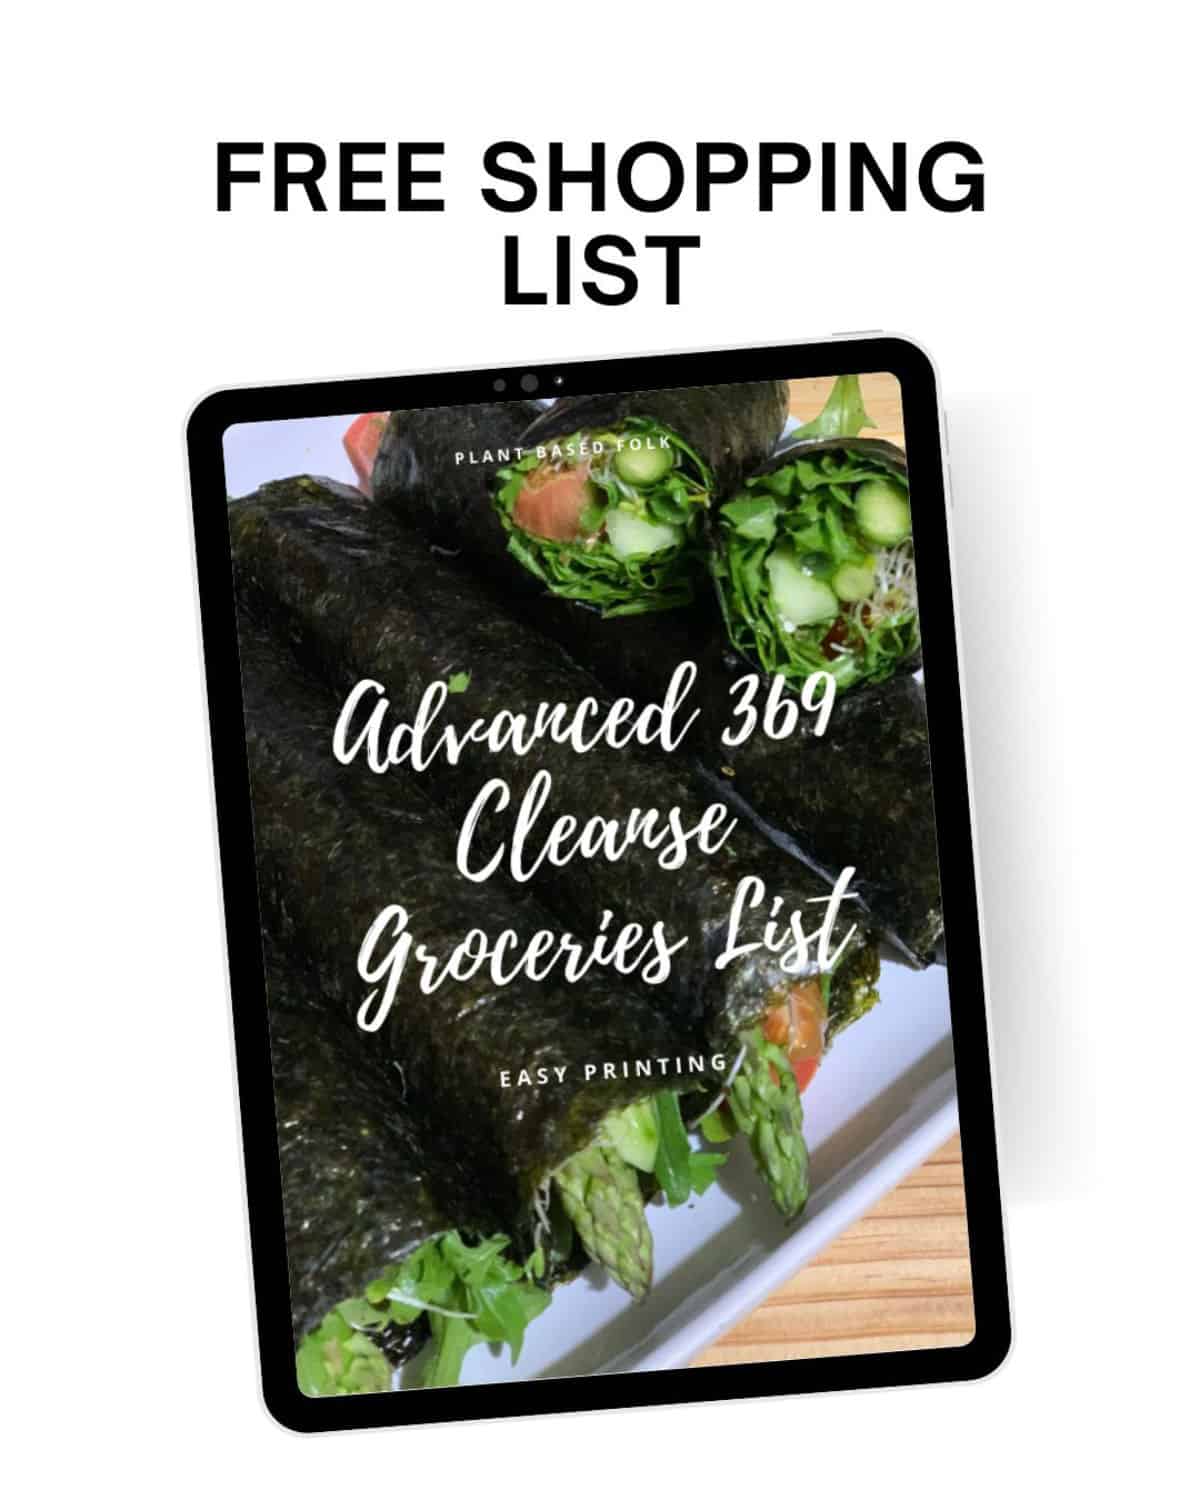 an ipad with a picture of sushi and the words "advanced 369 cleanse groceries list"